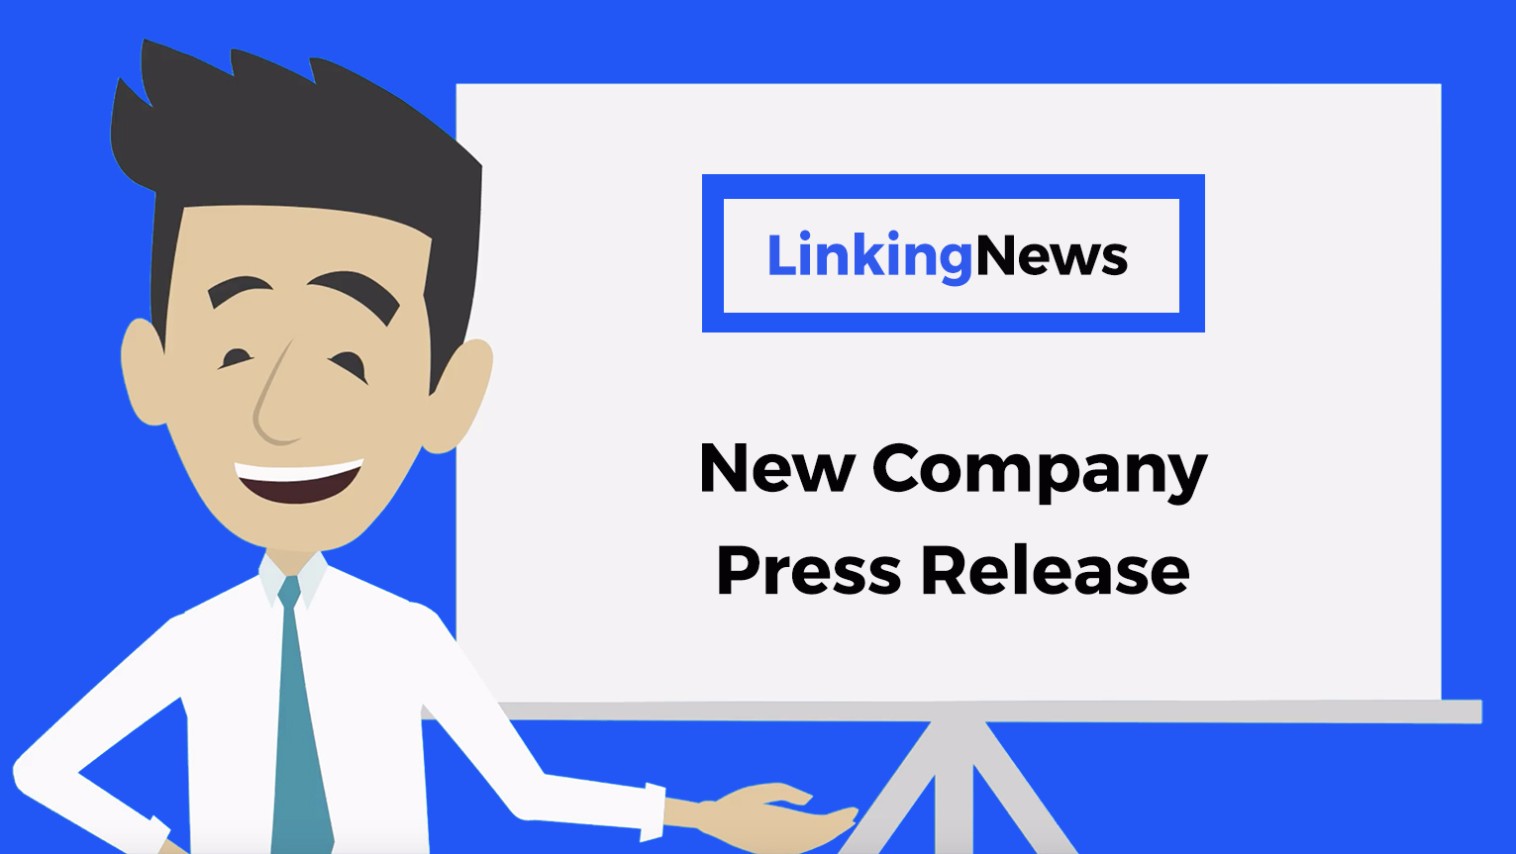 Linking News - How To Write A Press Release For A New Company, New